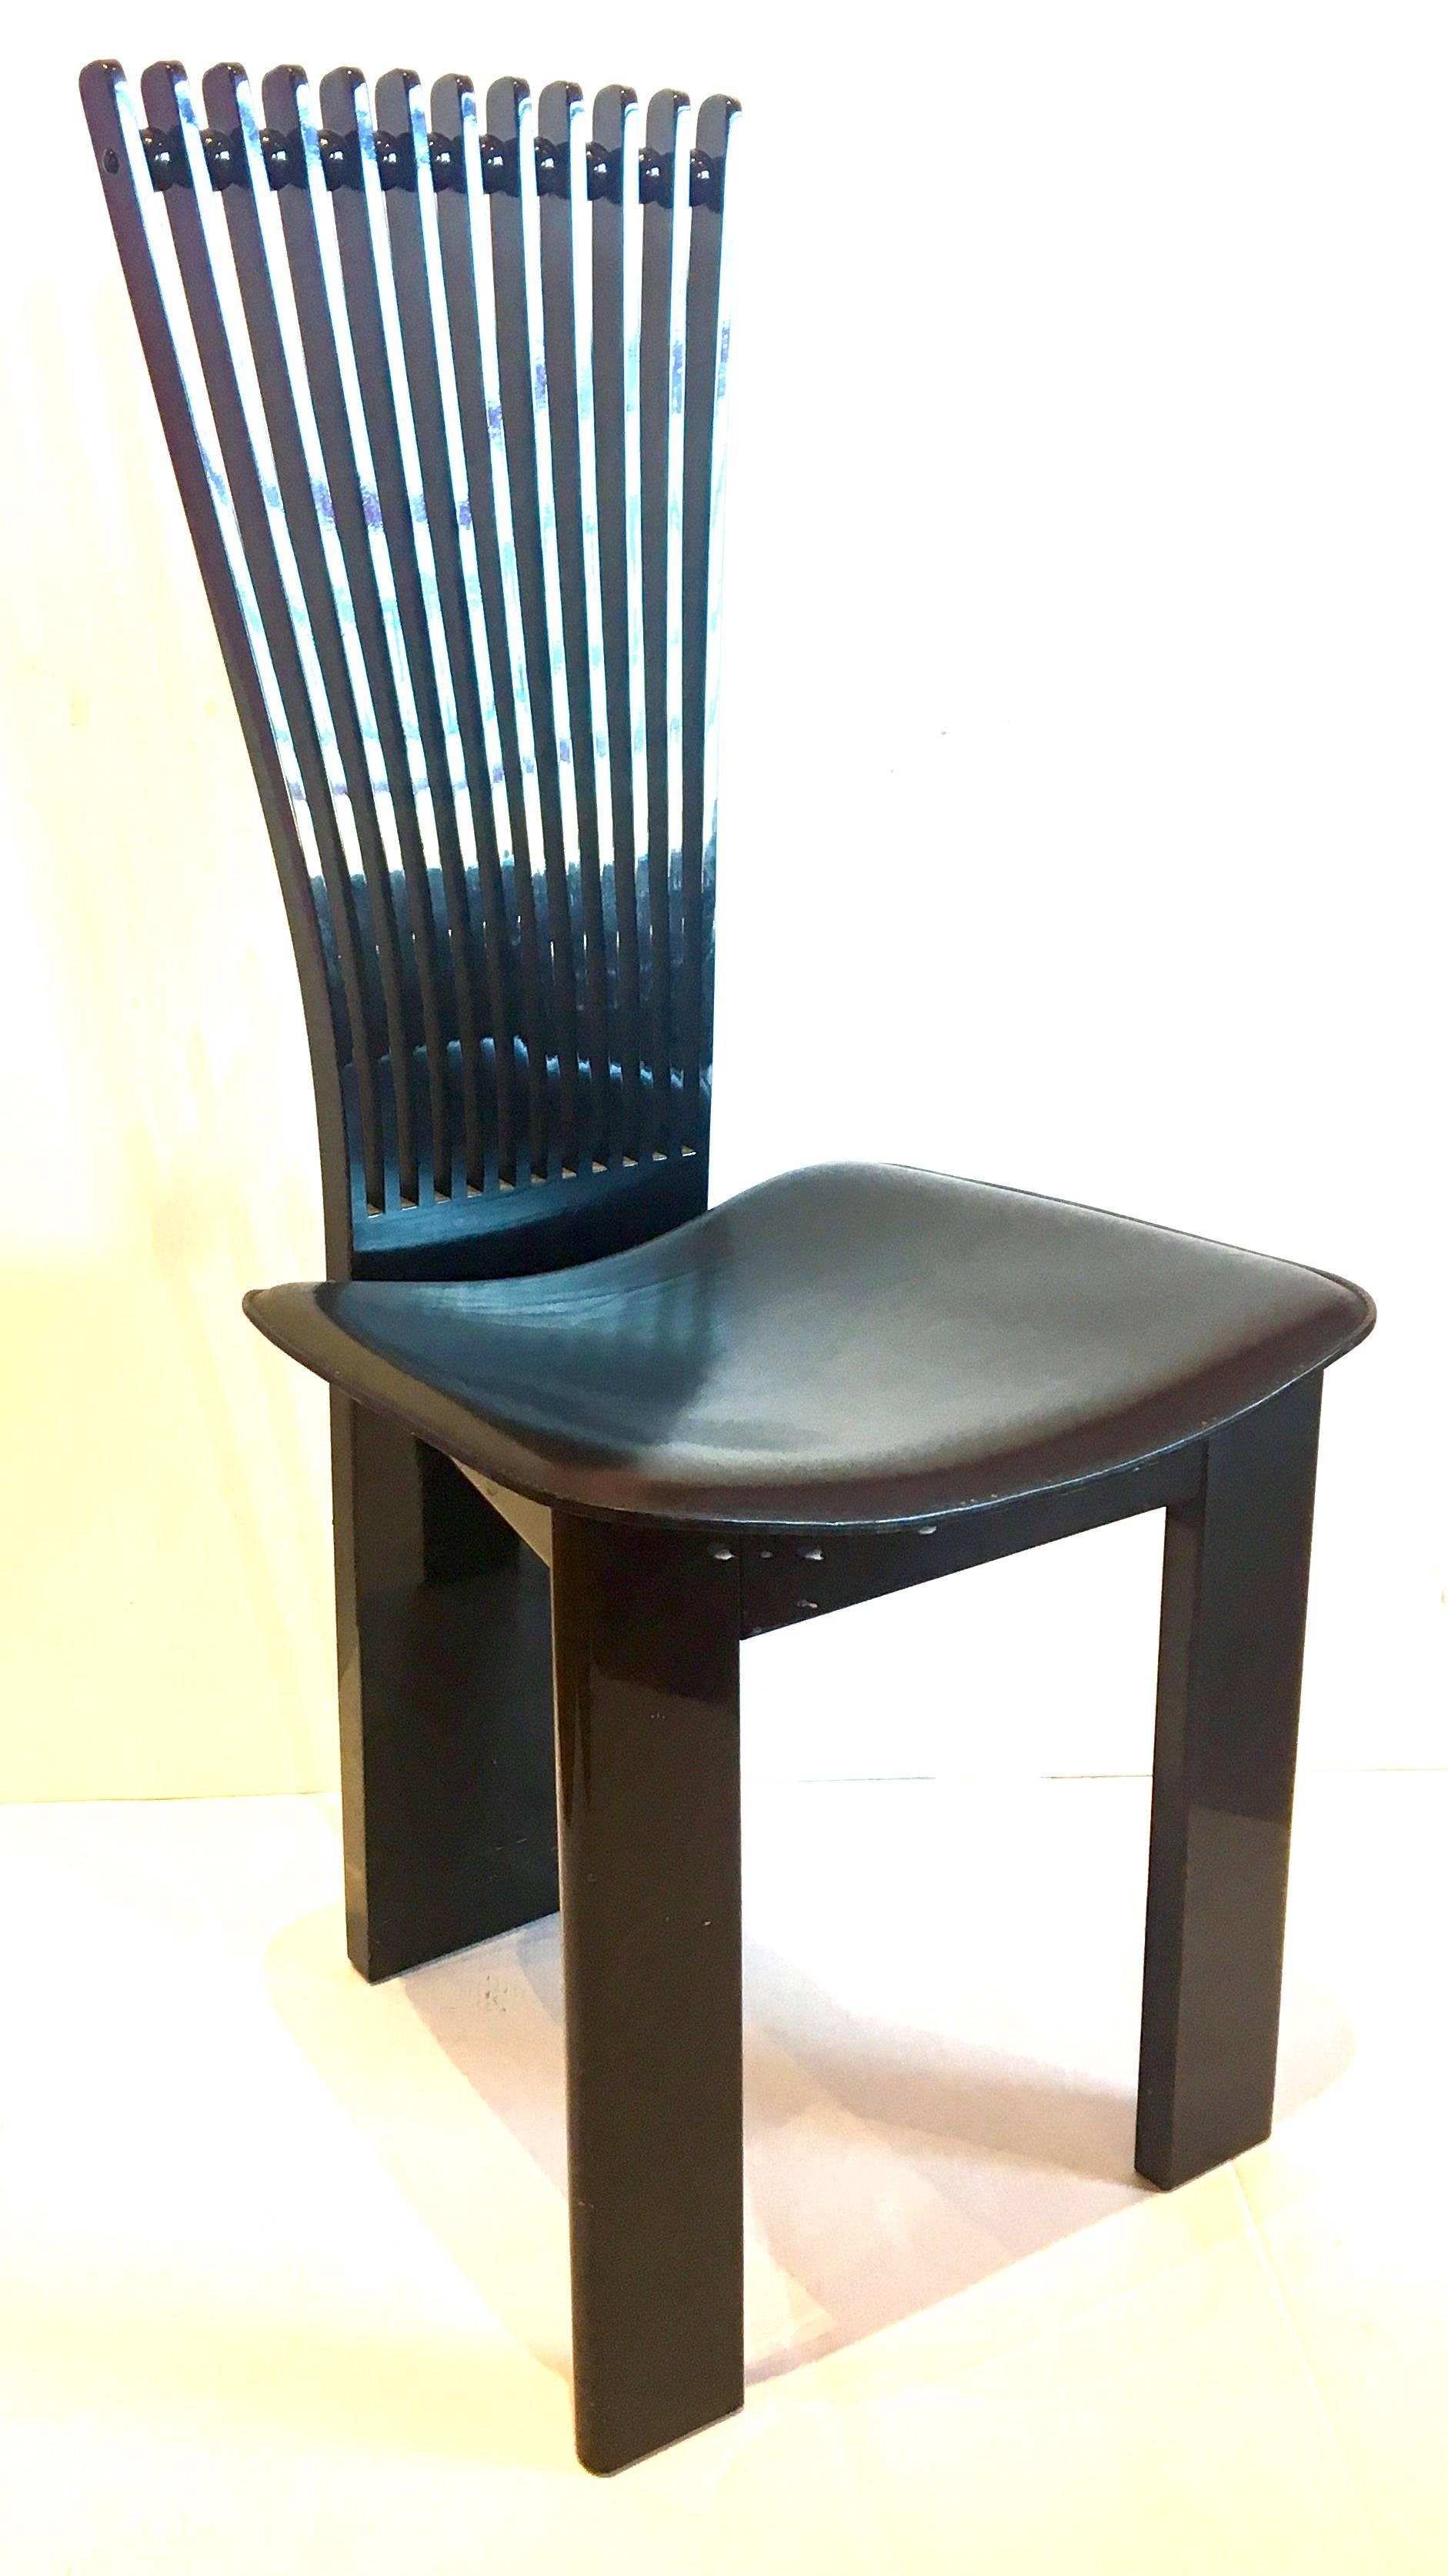 Set of four tall back Italian chairs by Pietro Costantini, circa 1990s in black lacquer glossy finish and hand stiched black leather seat, solid and sturdy elegant chairs, buyer has the choice to buy 1,2,3 or 4 , stamped made in Italy by Pietro